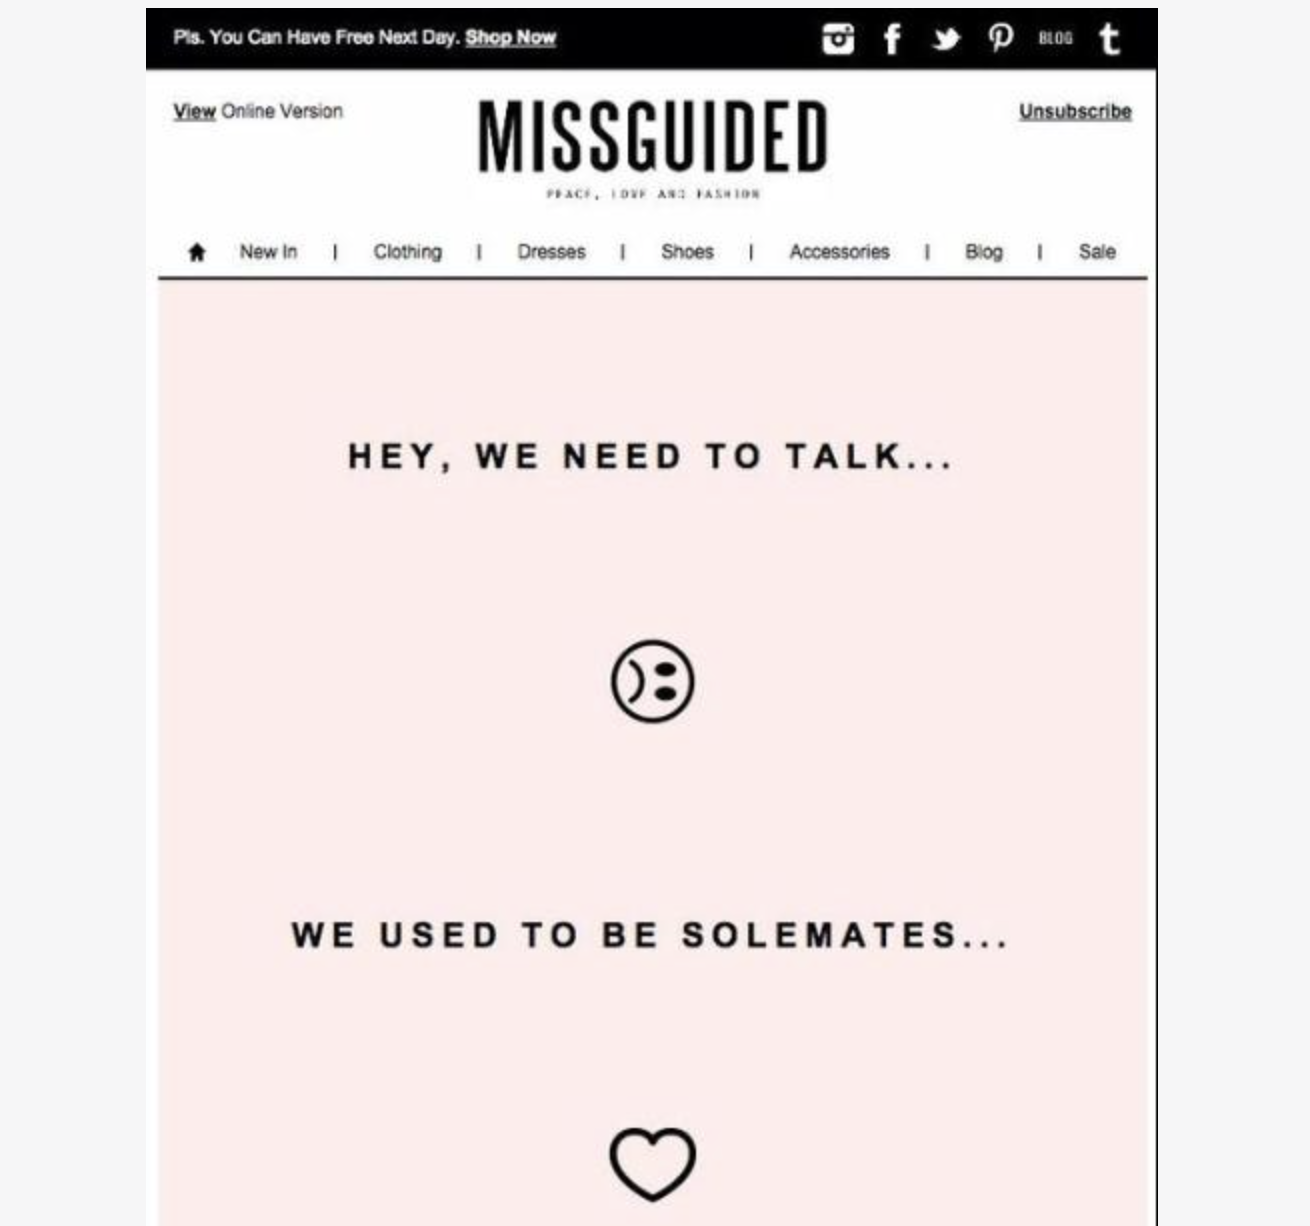 missguided email marketing